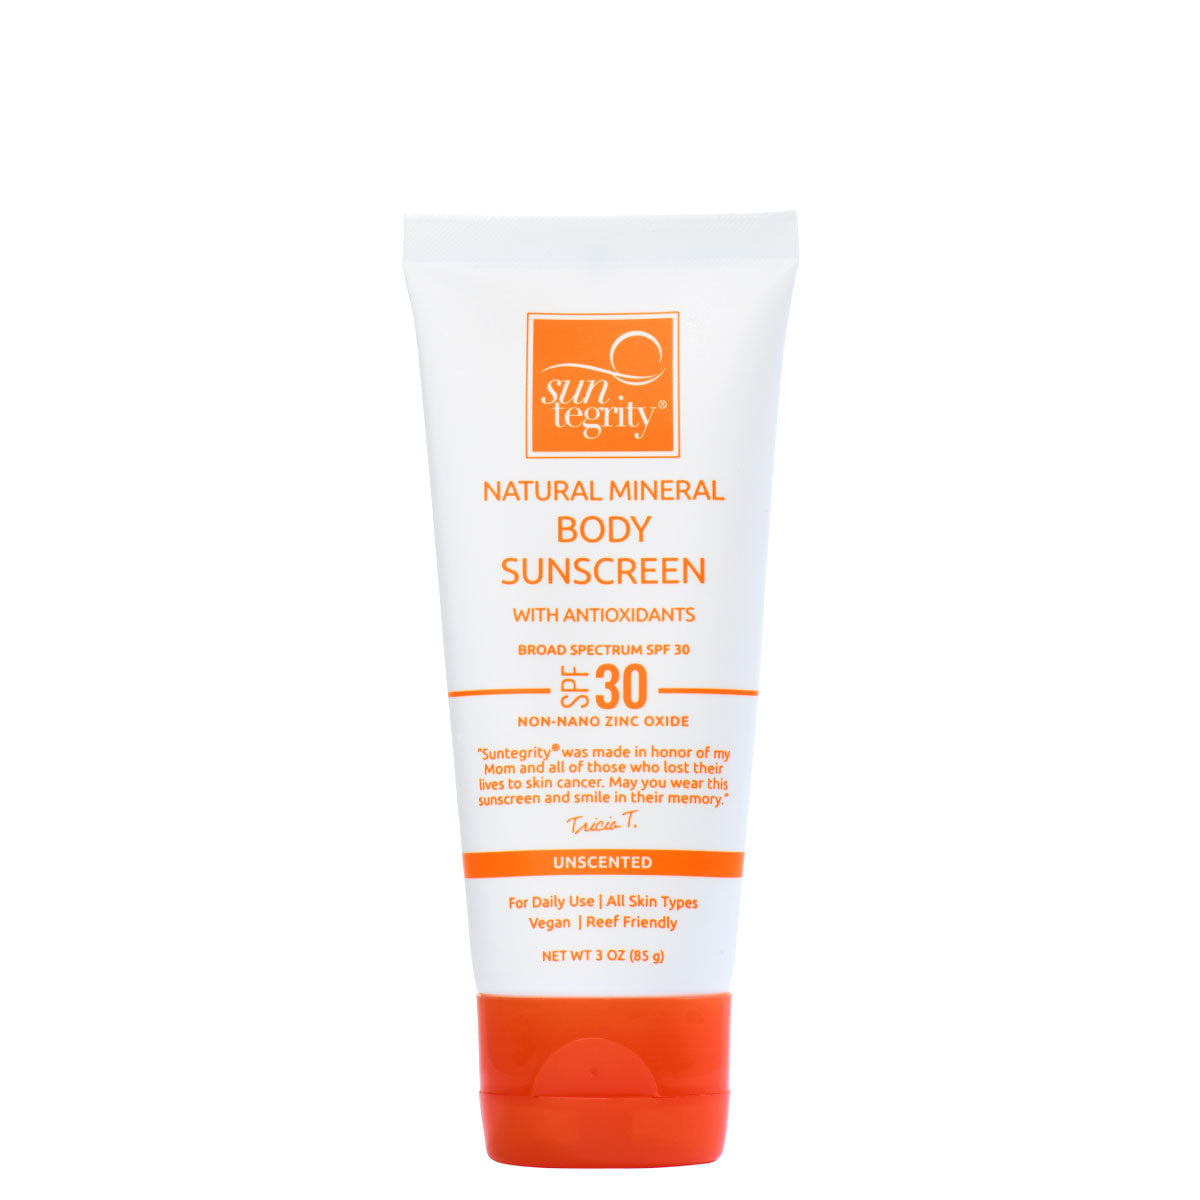 Suntegrity UNSCENTED Natural Mineral Body Sunscreen SPF 30 (3 oz)